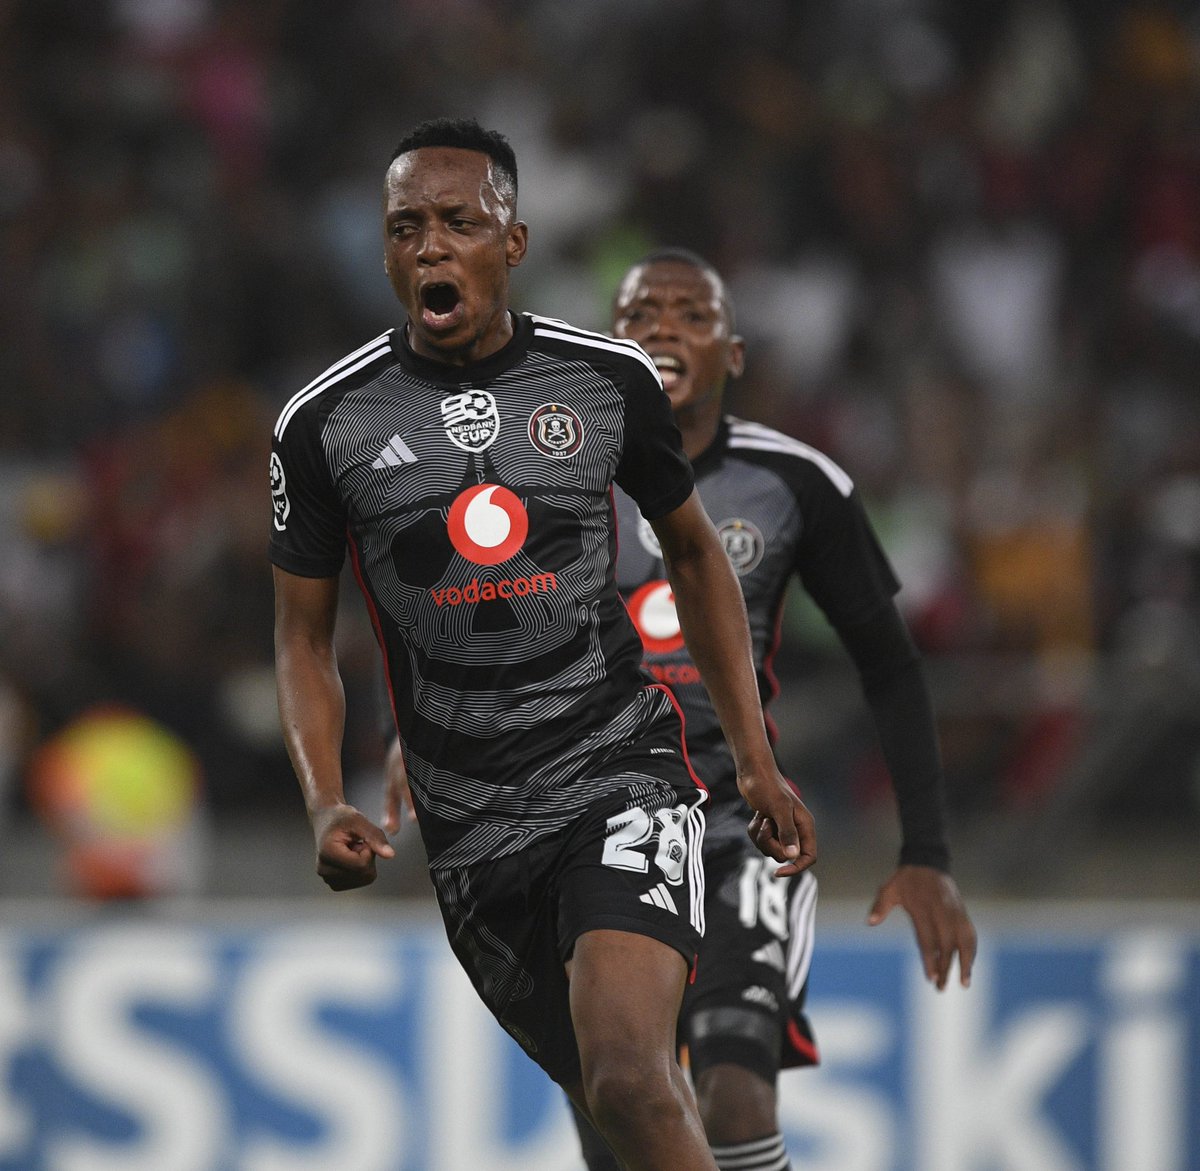 Good morning, Orlando Pirates supporters. It's match day buccaneers ☠️ ☠️☠️☠️. #OnceAlways #OrlandoPirates #UpTheBucs